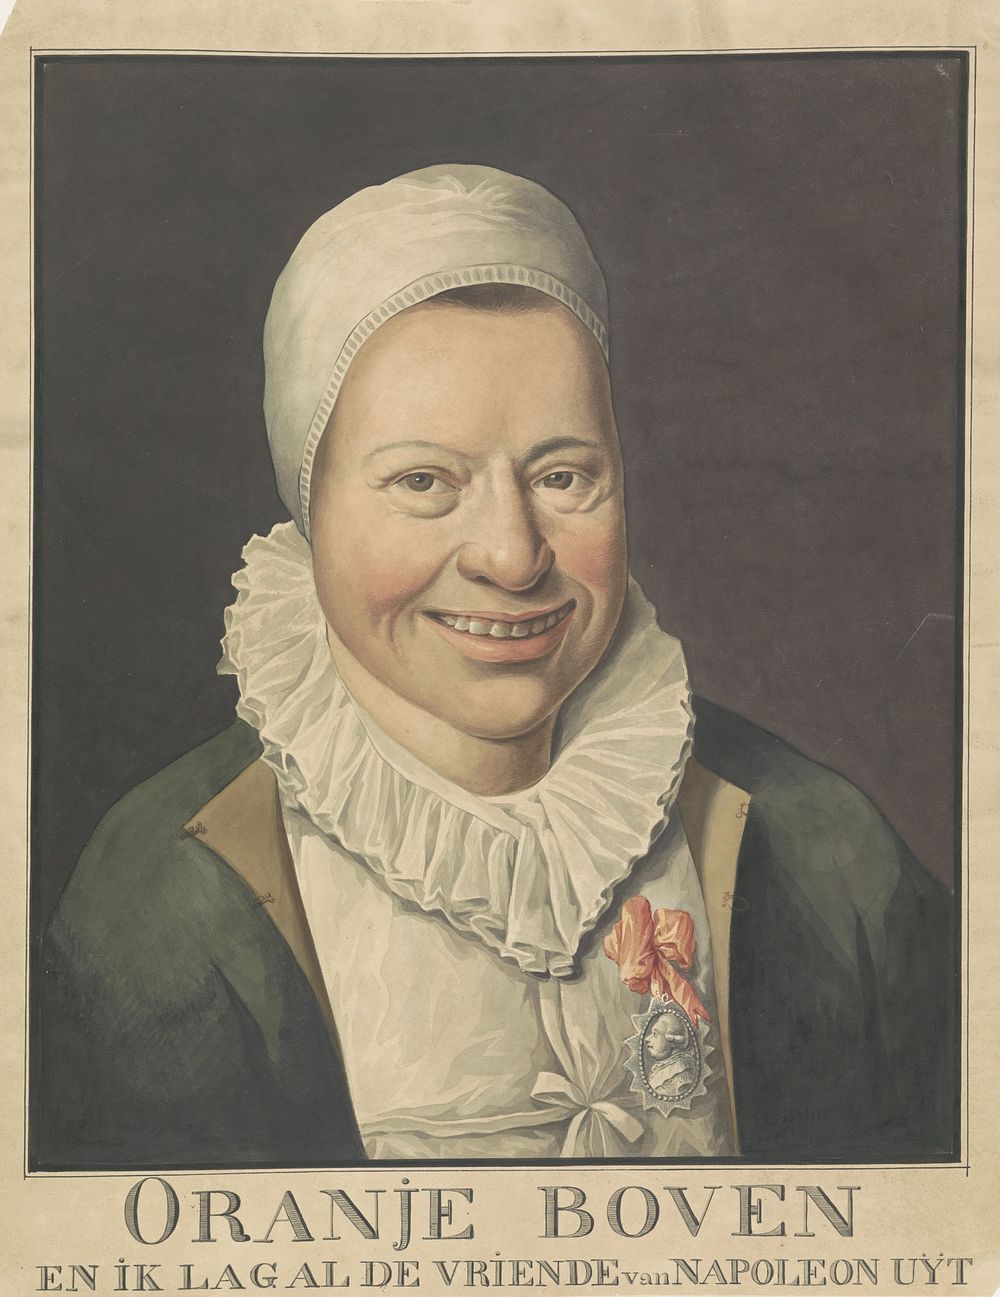 Lachende prinsgezinde vrouw, 1813 (1813) by anonymous